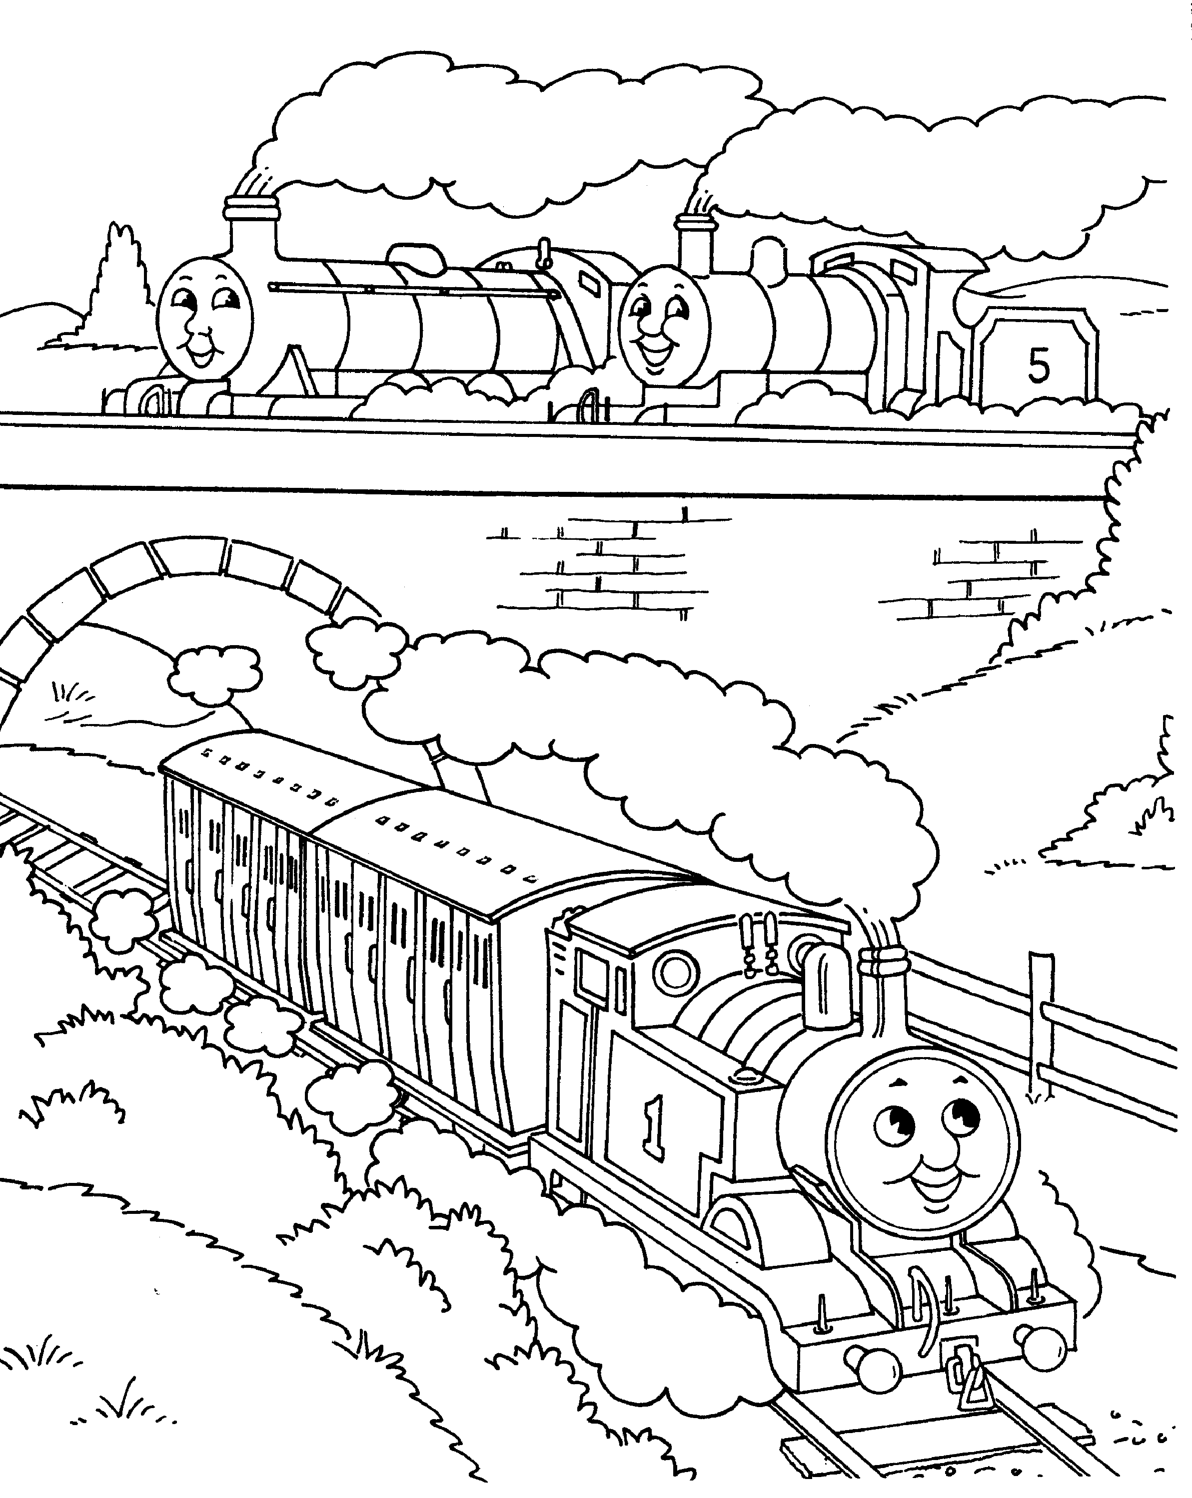 Thomas the train coloring pages - Coloring Pages